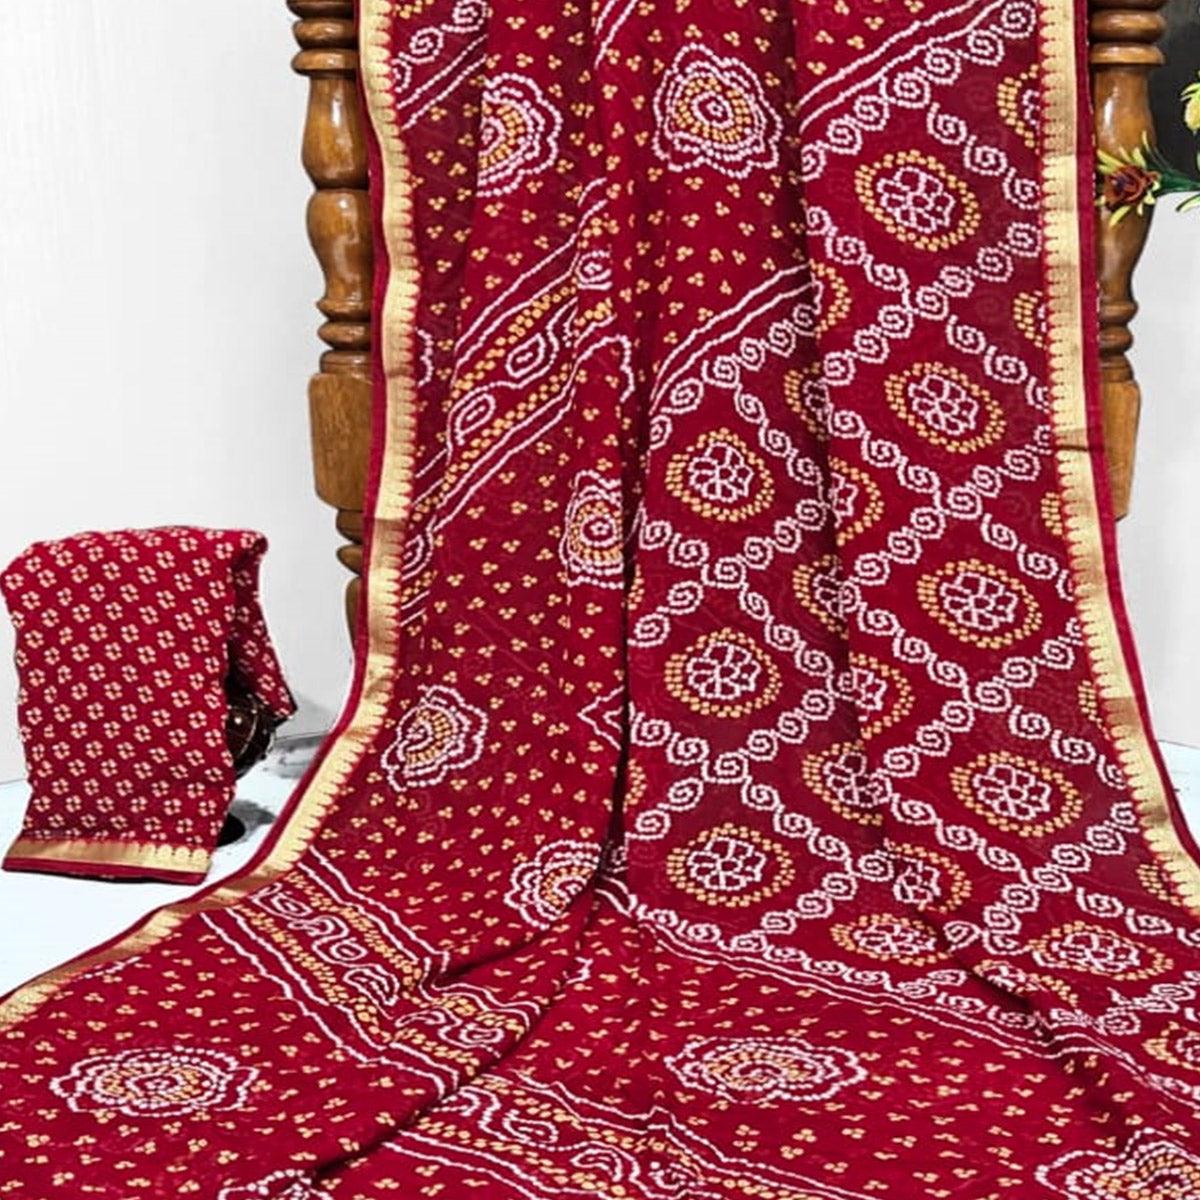 Red Casual Wear Bandhani Printed Georgette Saree With Designer Border - Peachmode